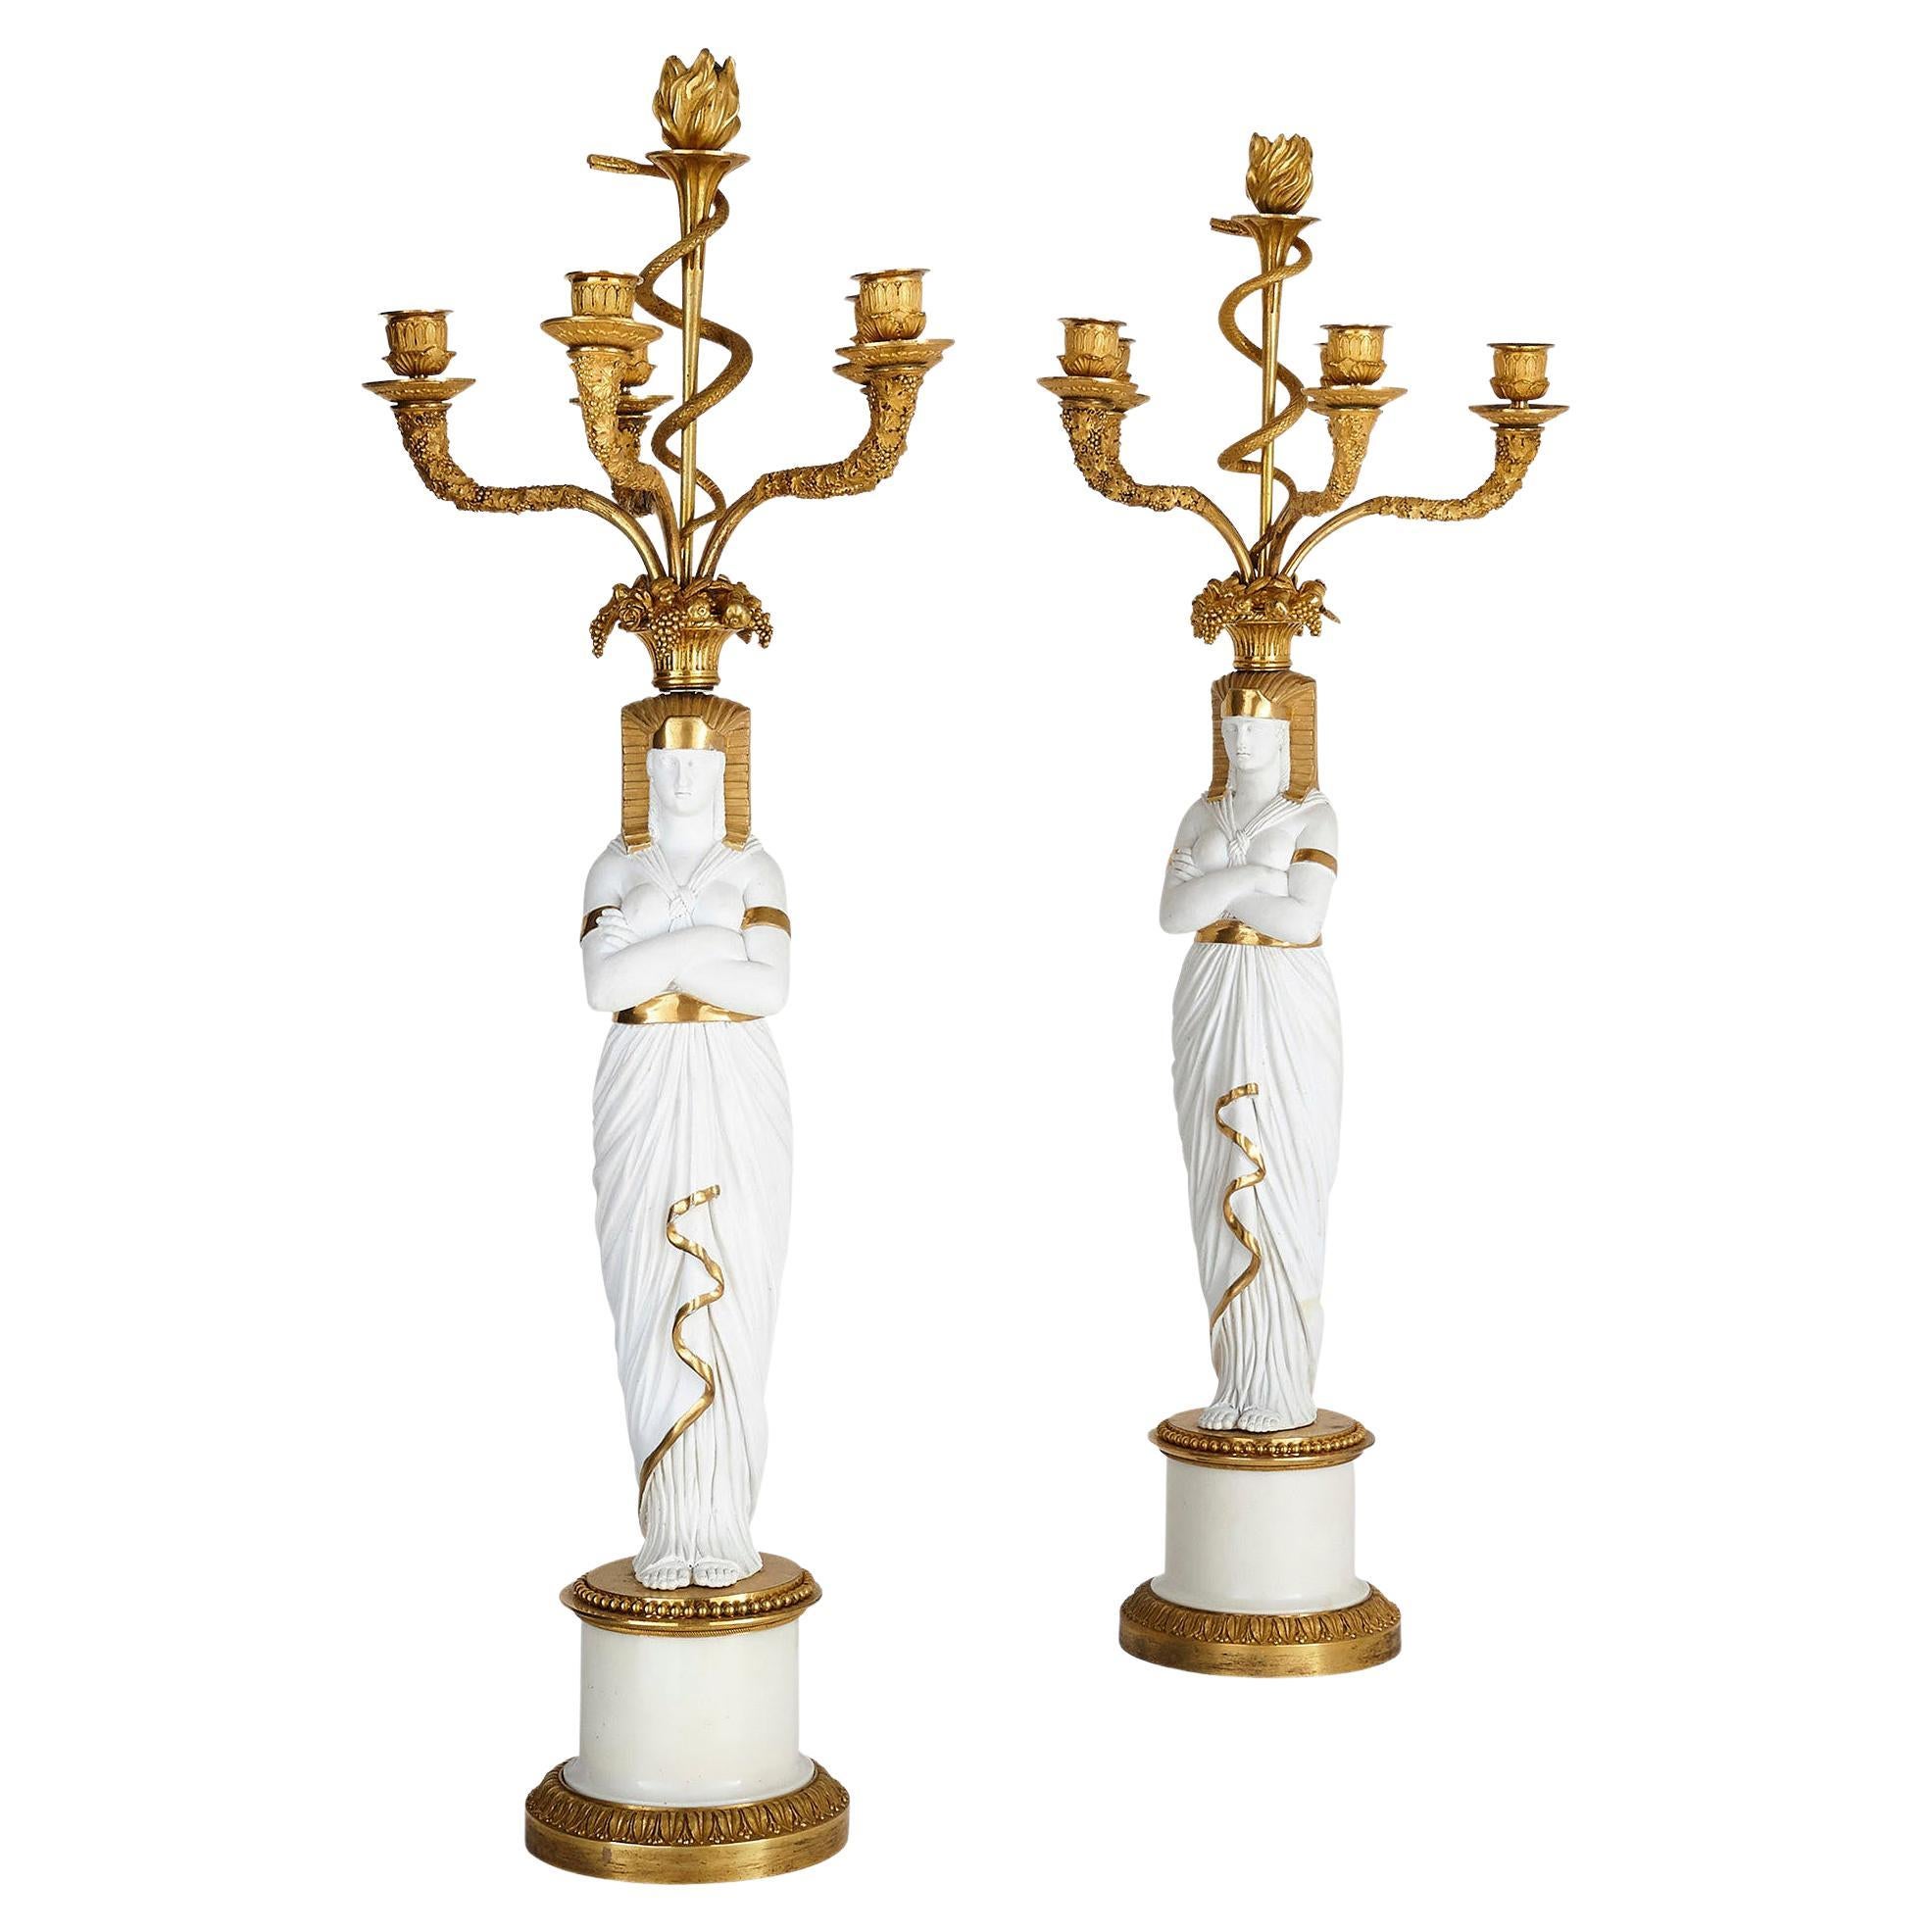 French Empire Period Egyptian Style Porcelain Candelabra